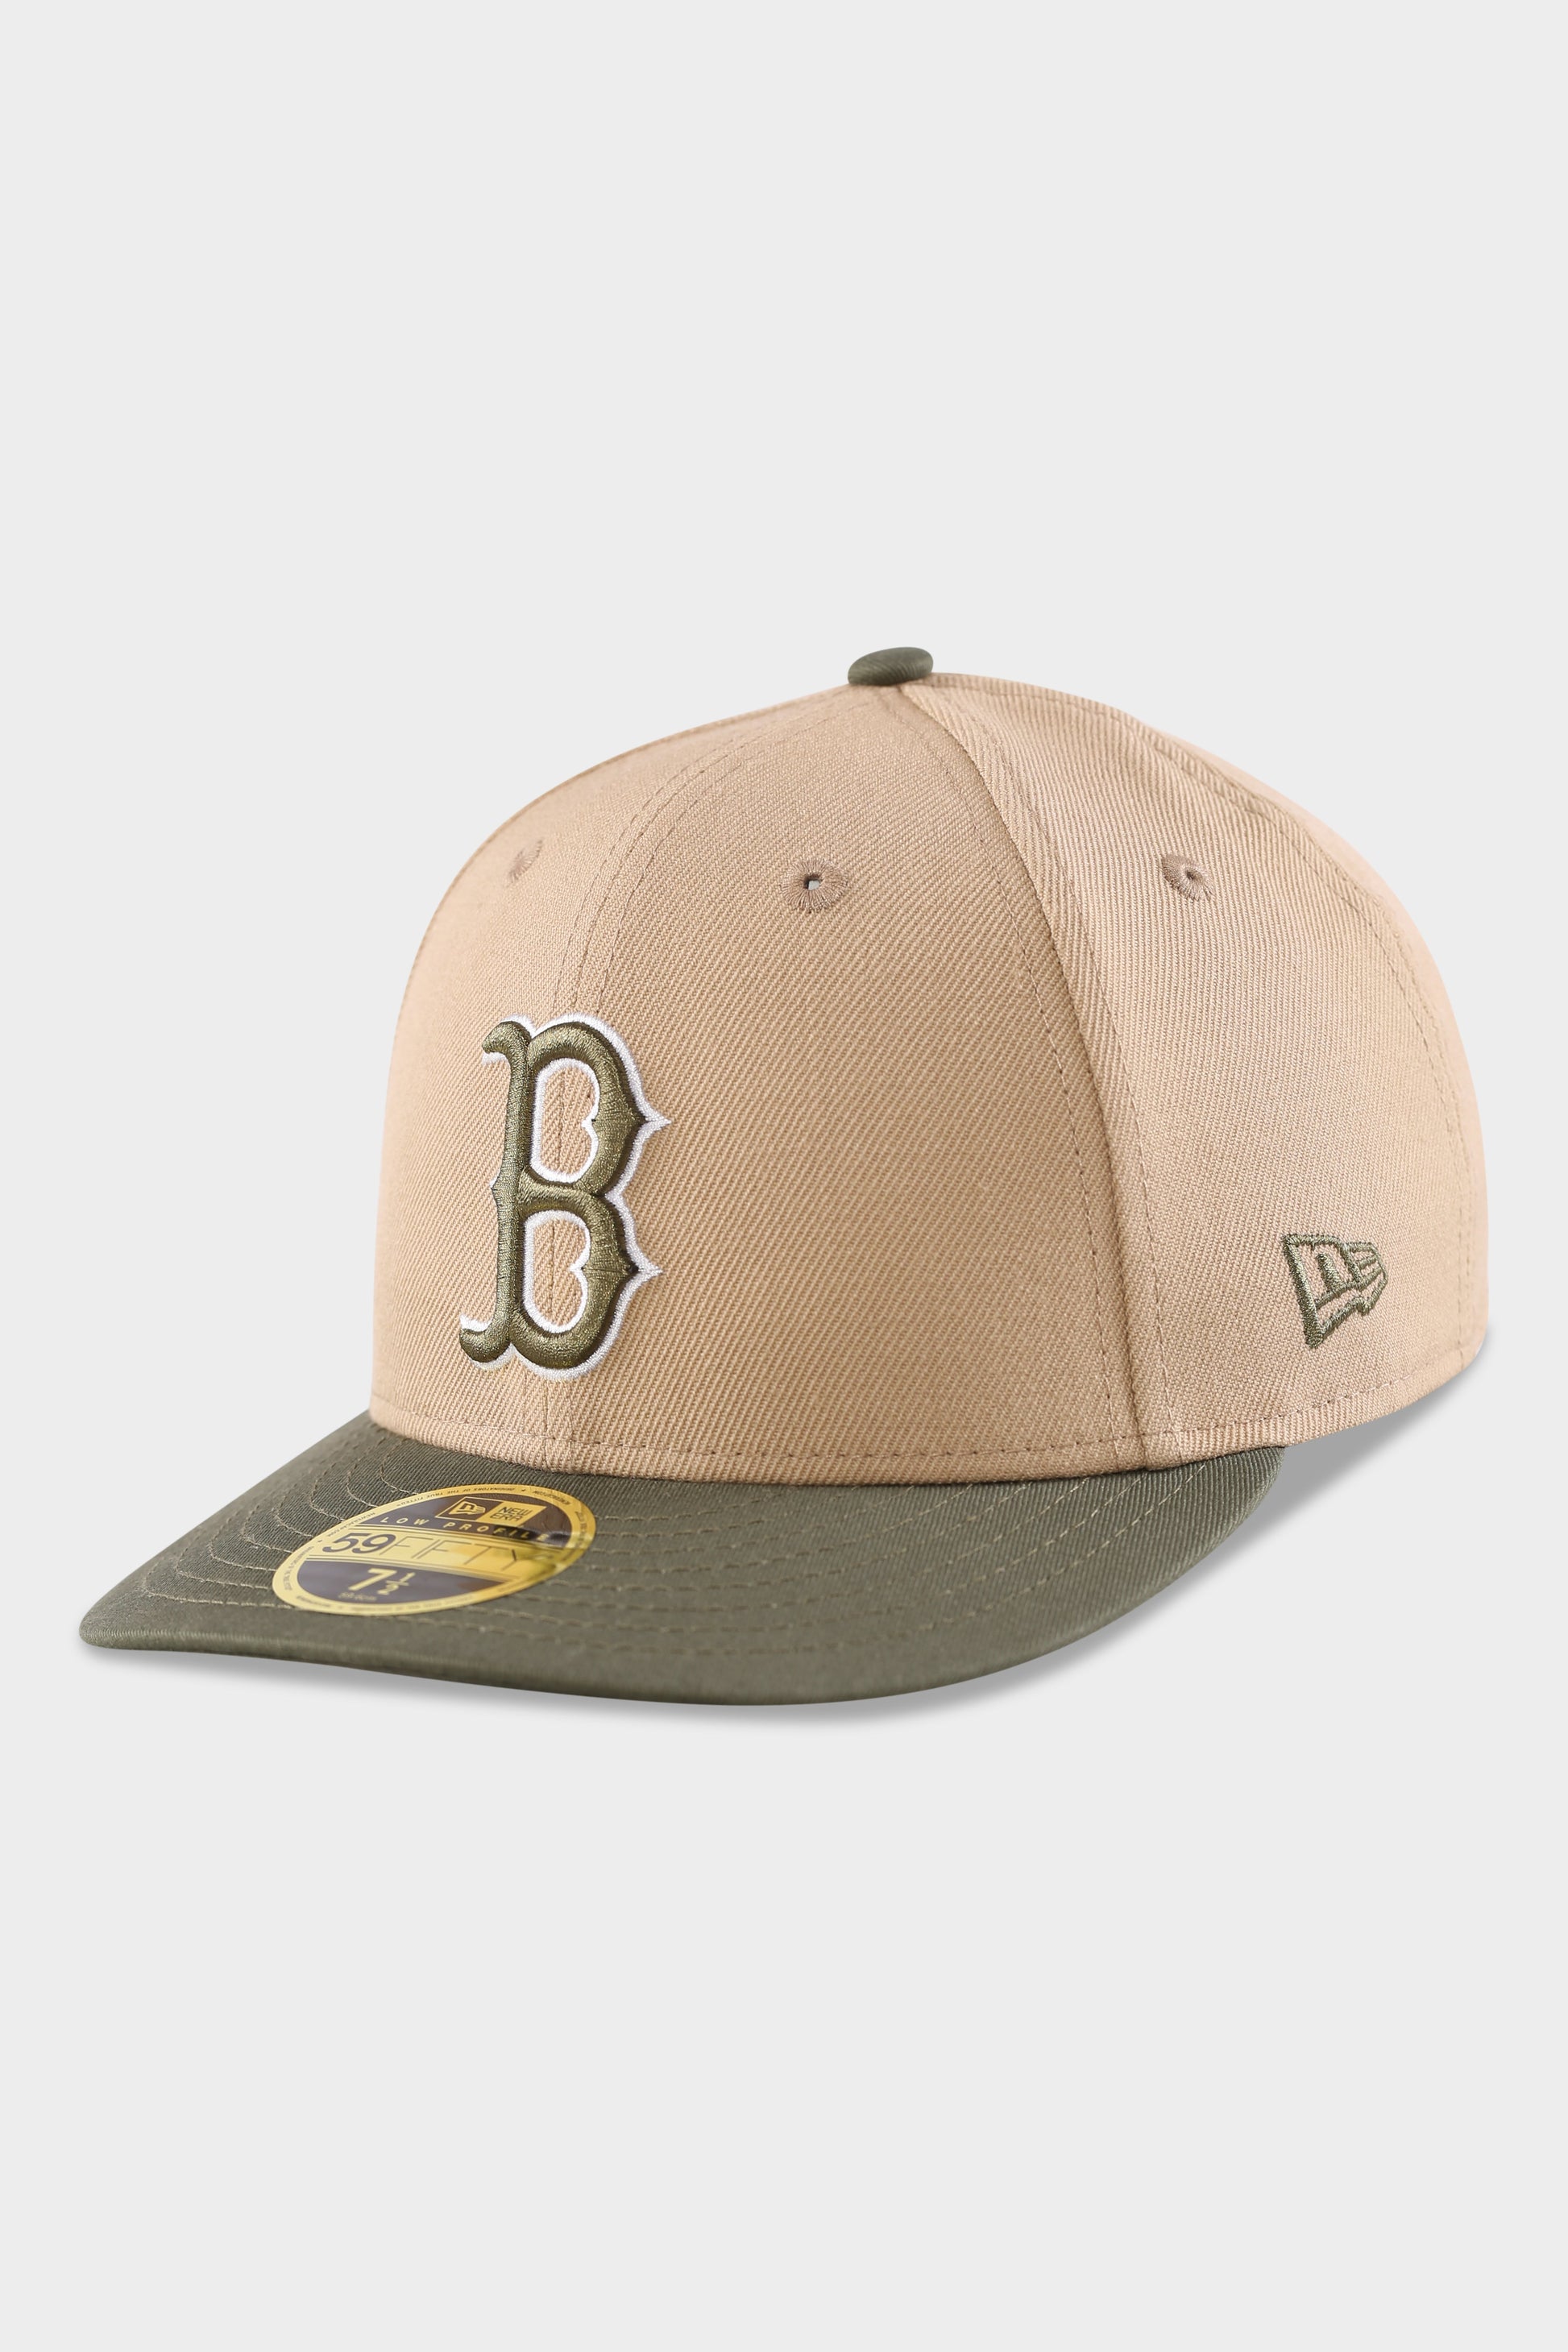 New Era 5950 Red Sox Camel/New Olive Angnle